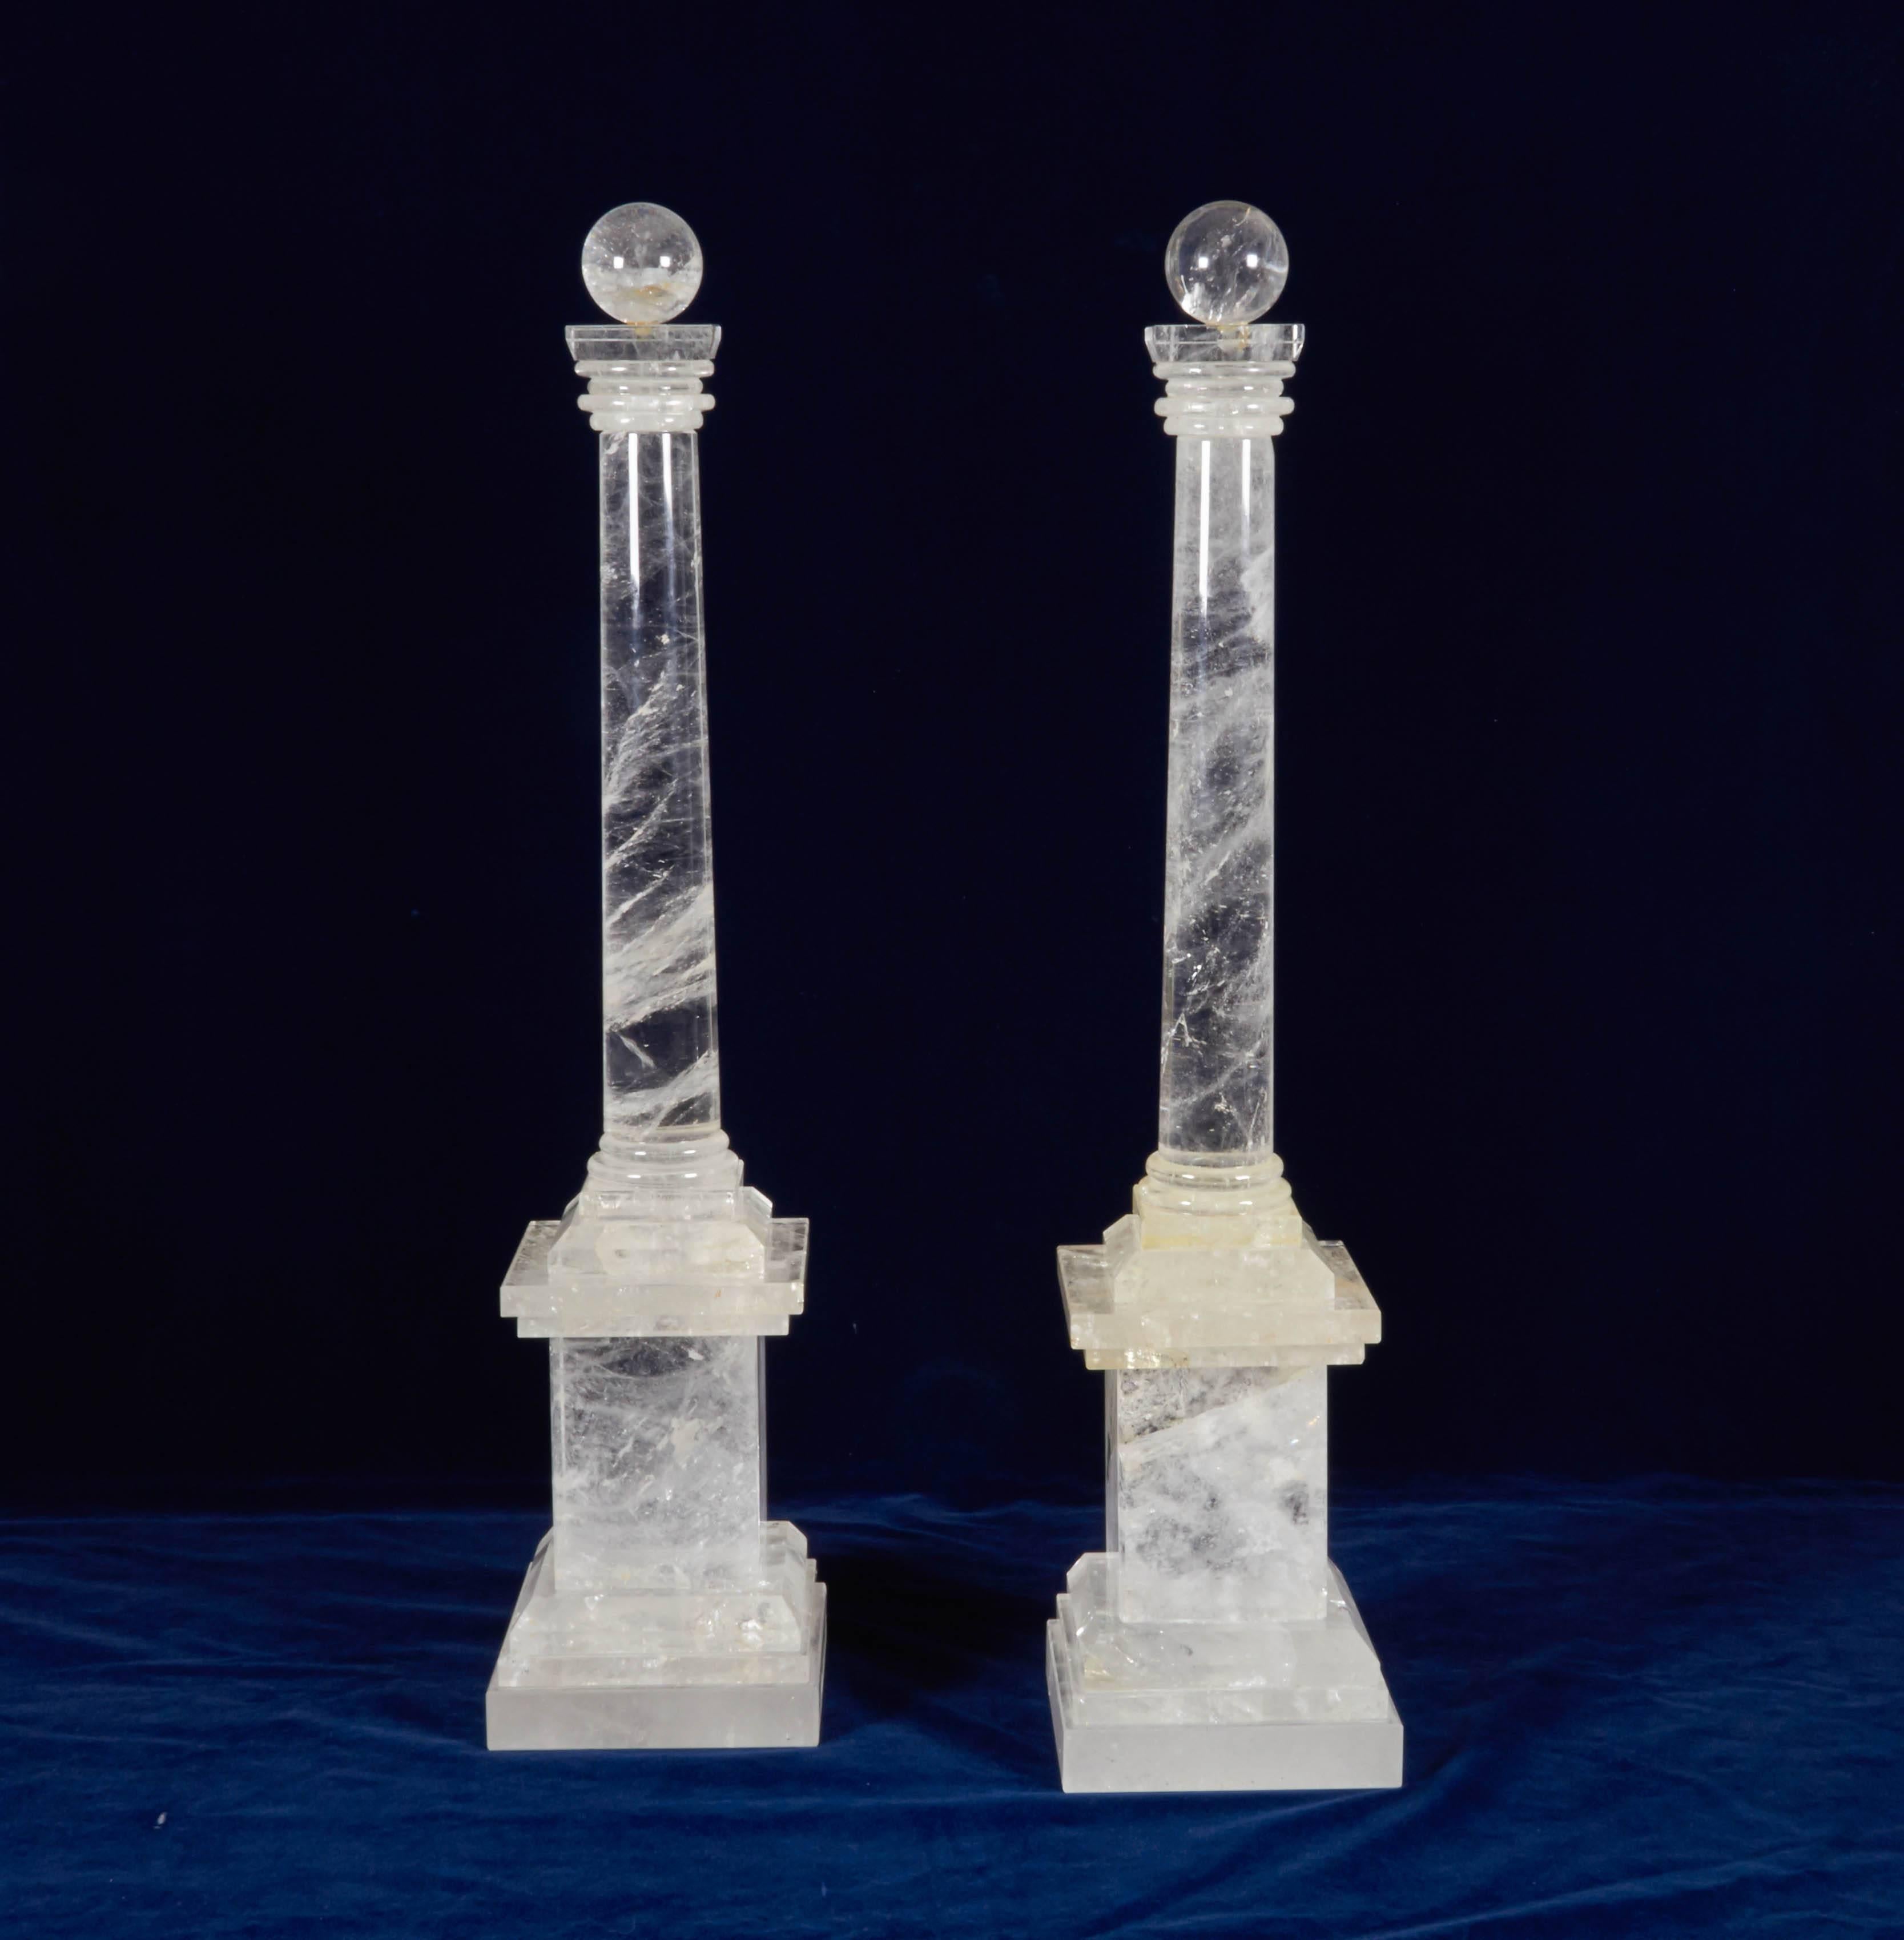 A monumental pair of French Art Deco style hand-carved rock crystal quartz obelisks after the Grand Tour model, 